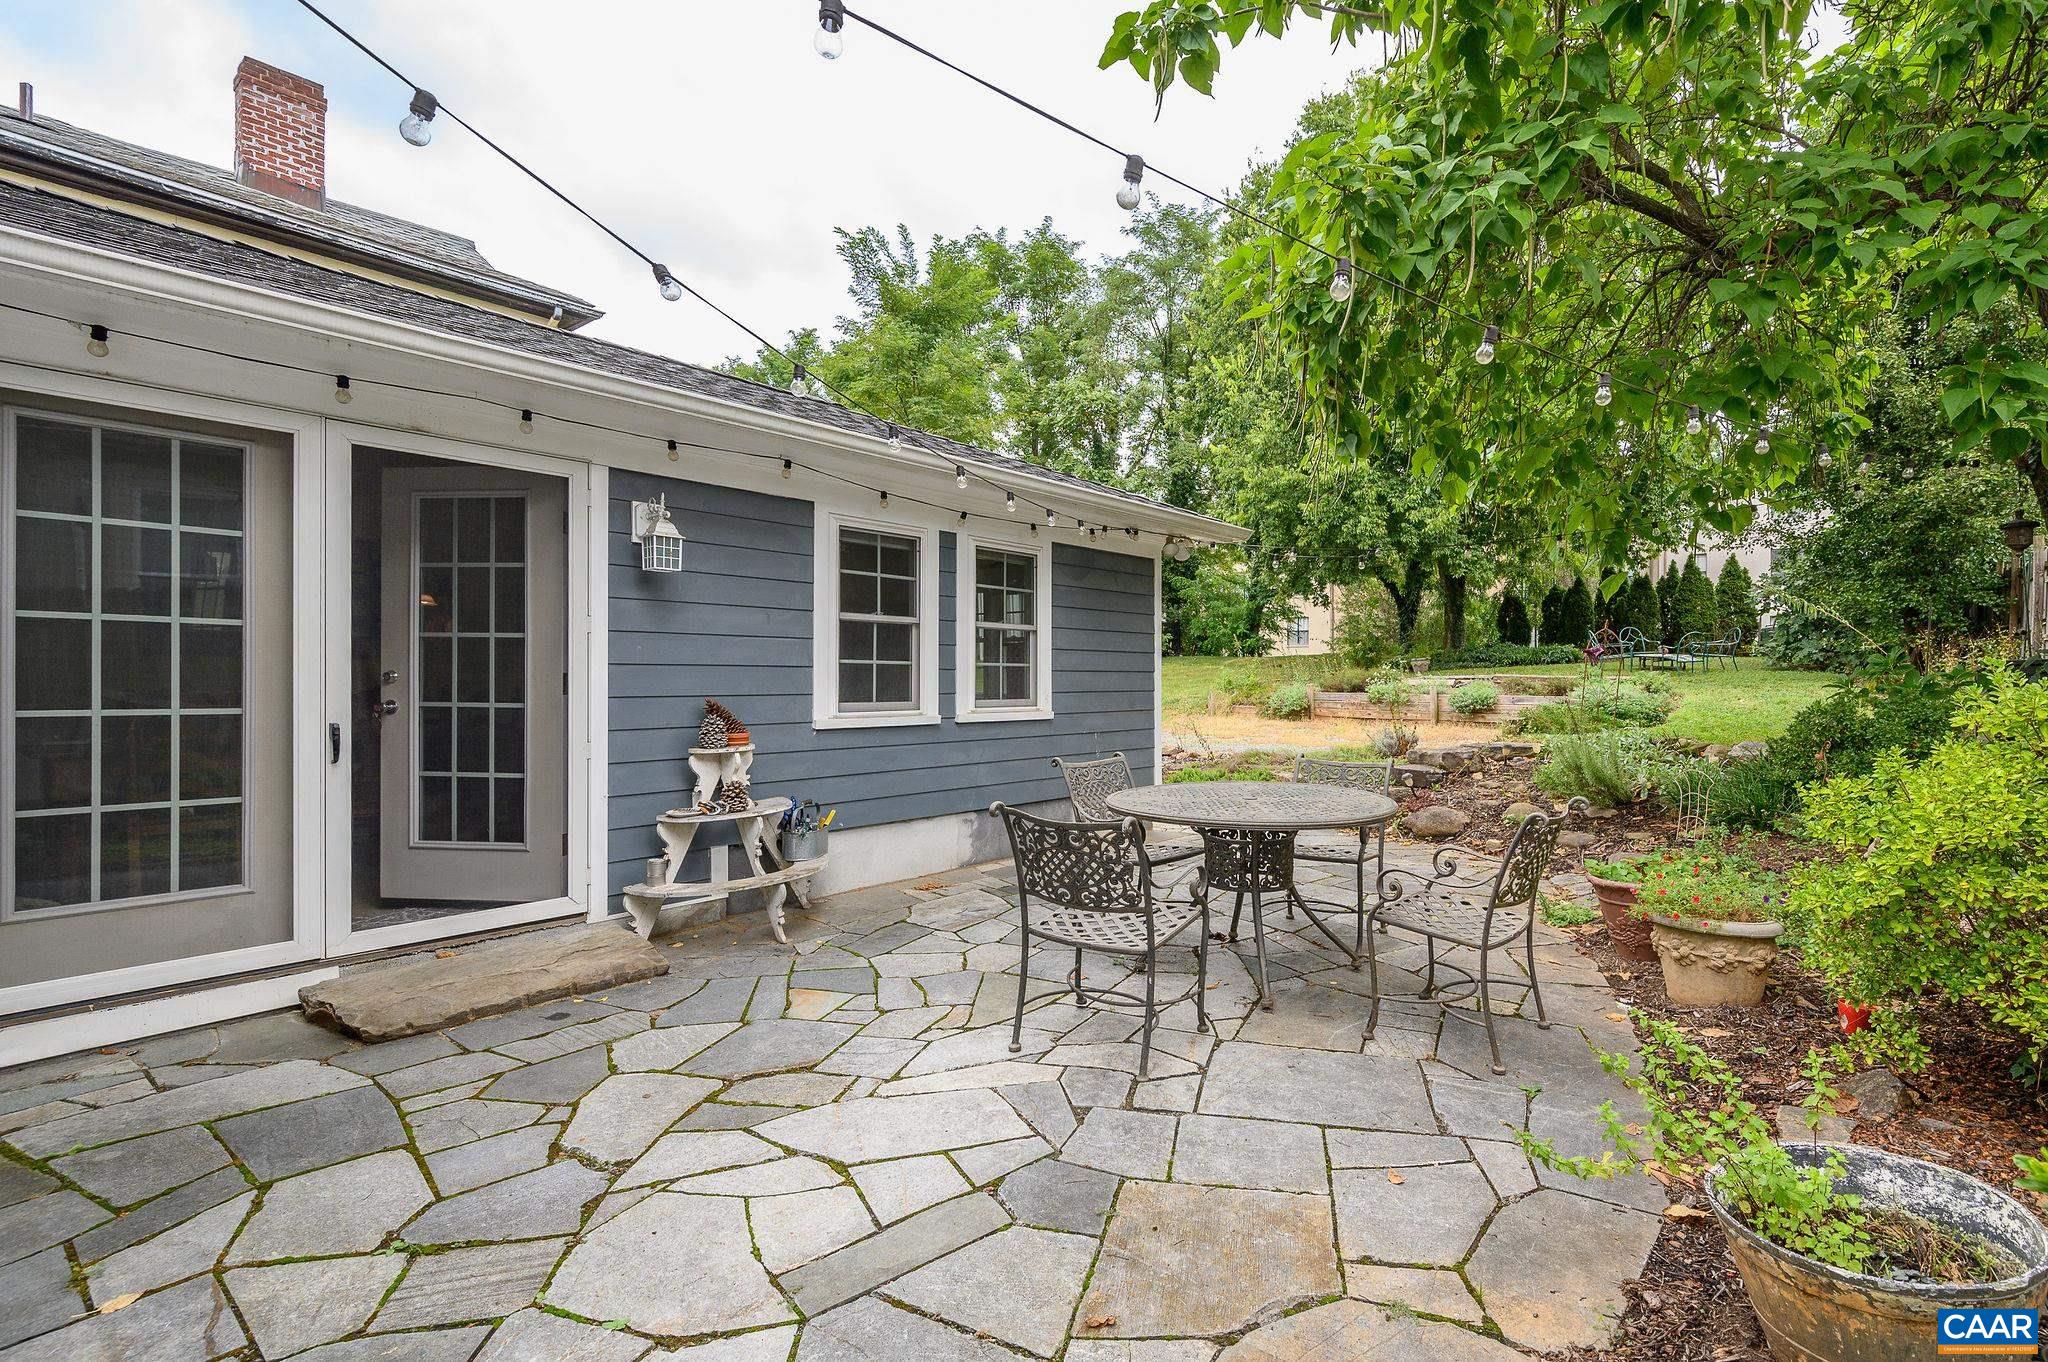 Welcome to 719 Nalle St.!  Imagine dinners on the stone patio and time spent in the beautiful landscaped yard.